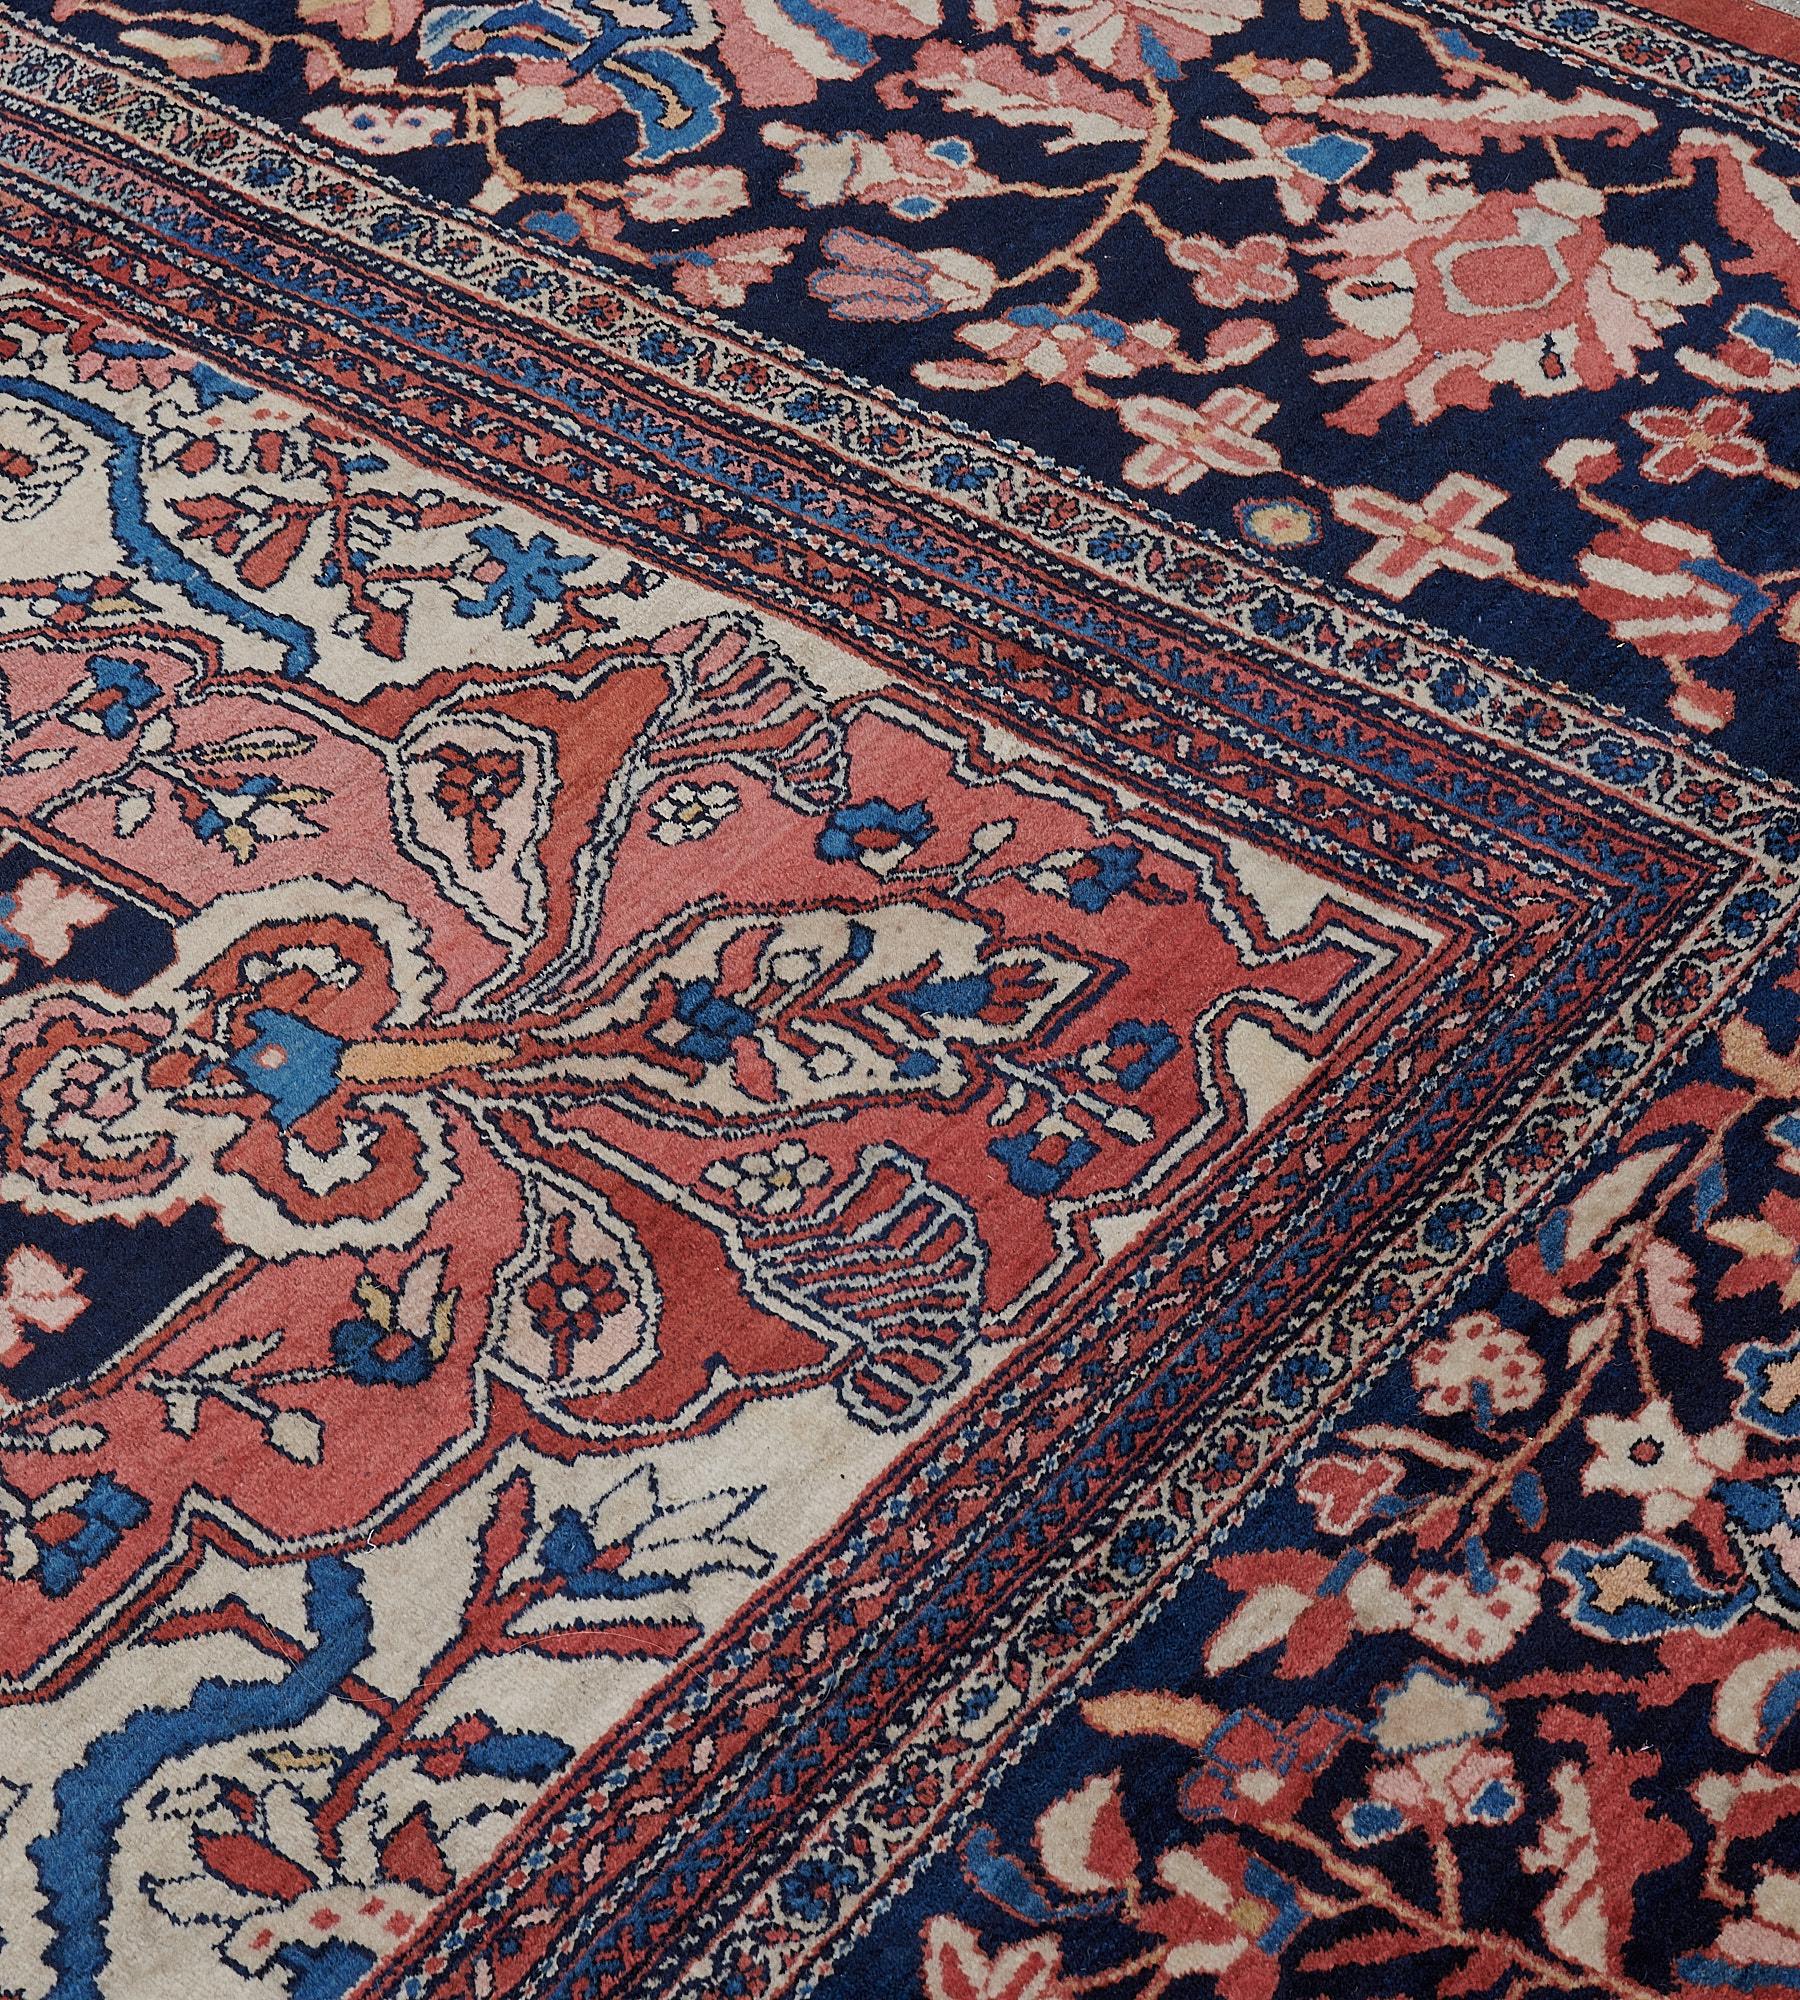 Hand-Knotted Antique Handwoven Persian Faraghan Rug in Perfect Condition For Sale